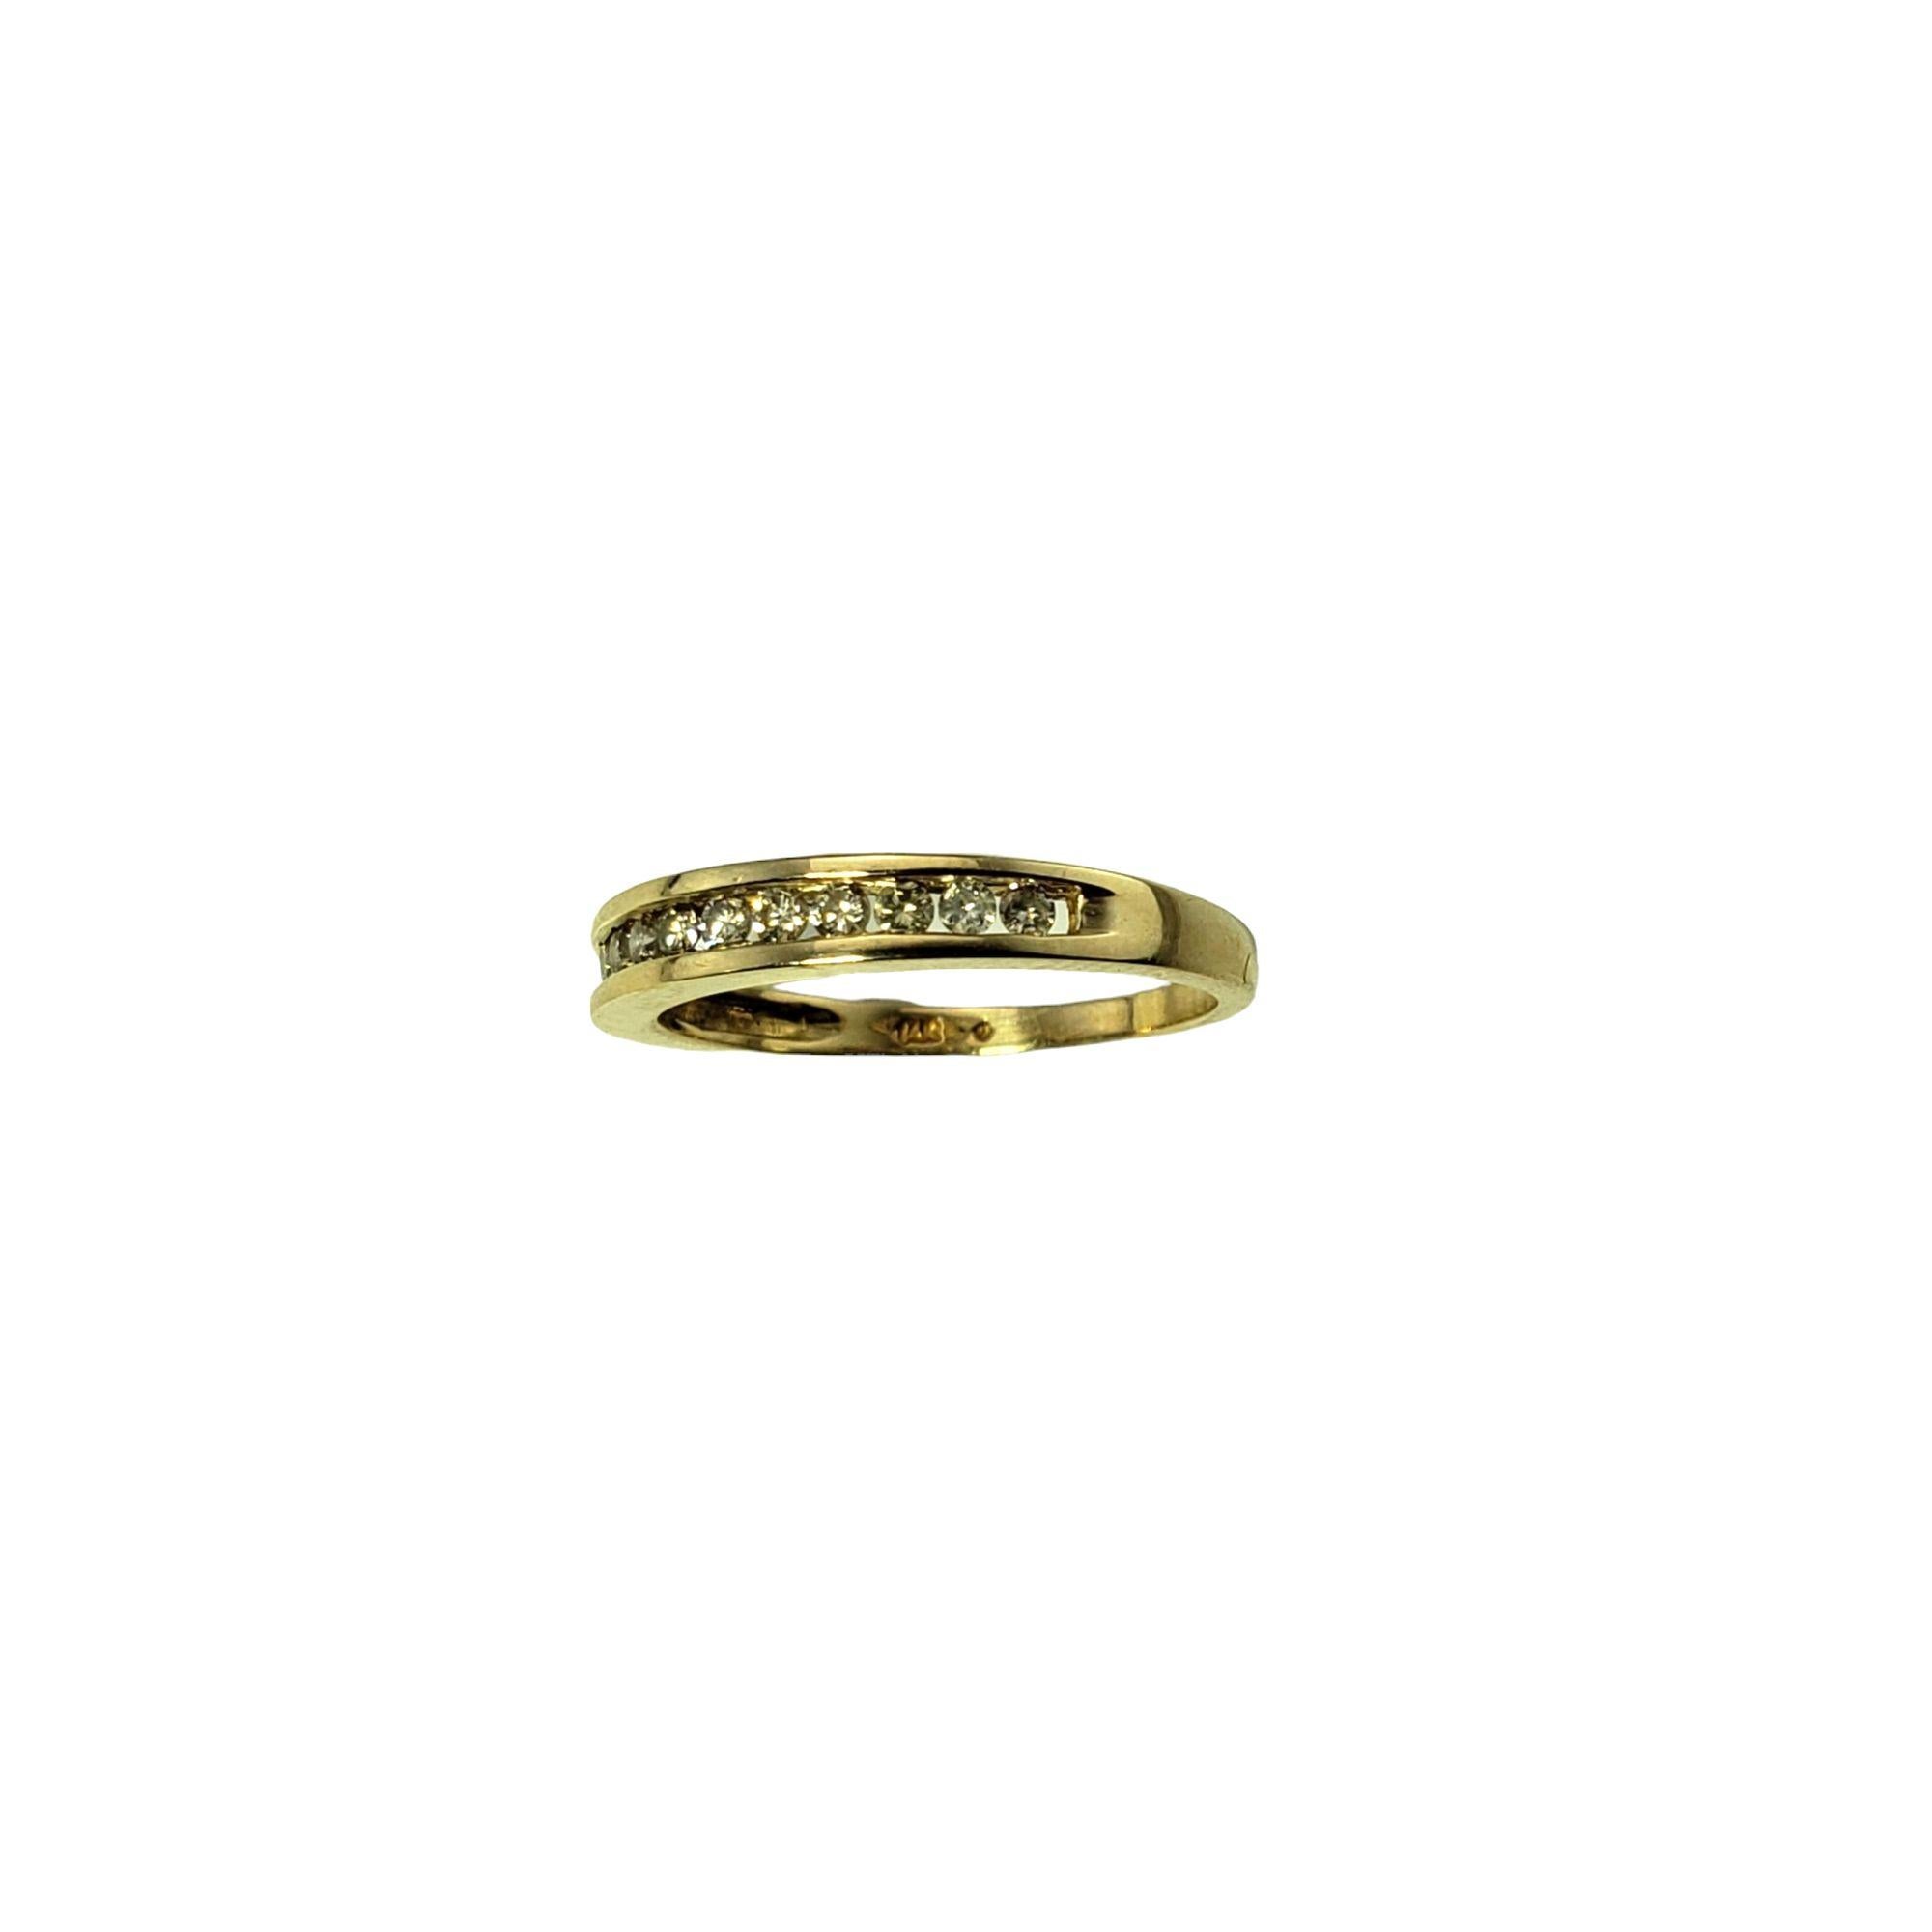 14 Karat Yellow Gold and Diamond Wedding Band Ring Size 6.75 In Good Condition For Sale In Washington Depot, CT